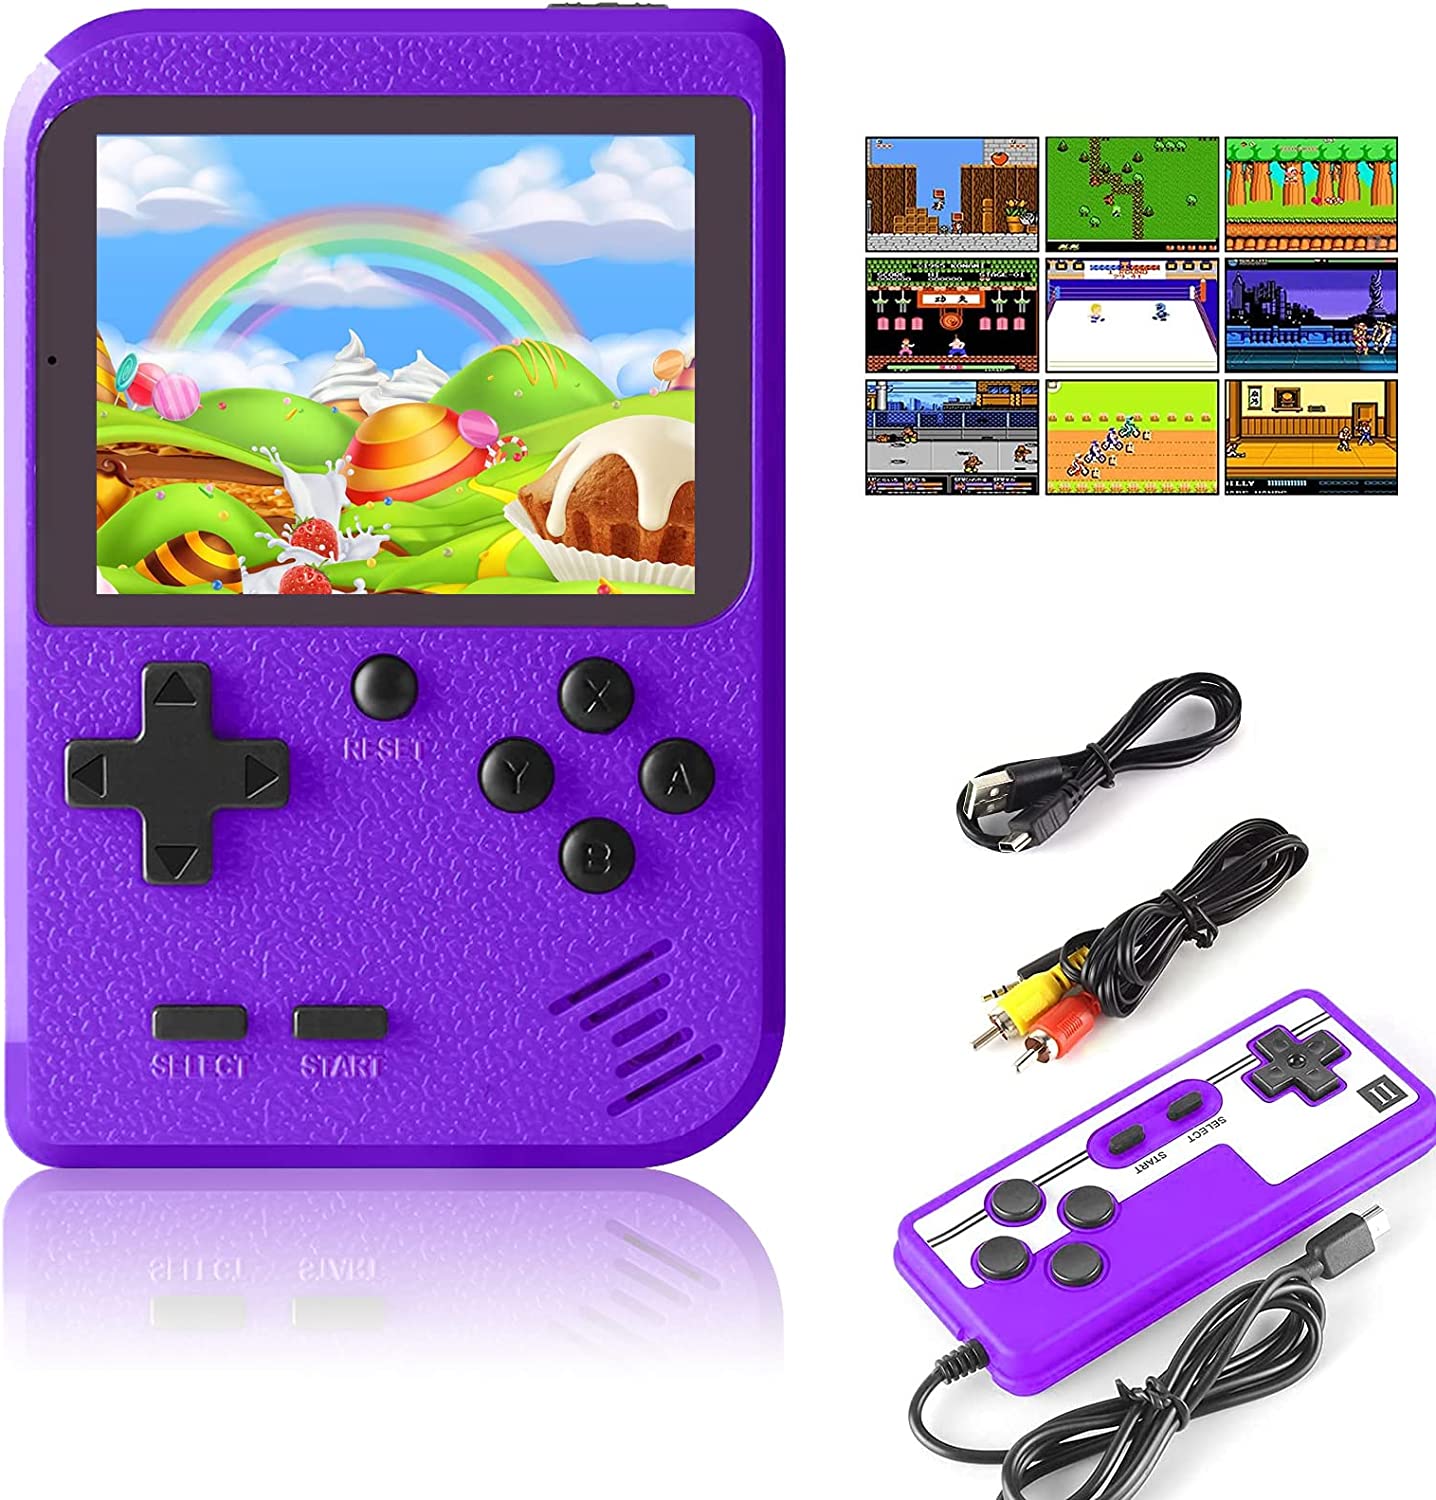 Handheld FC Games Console